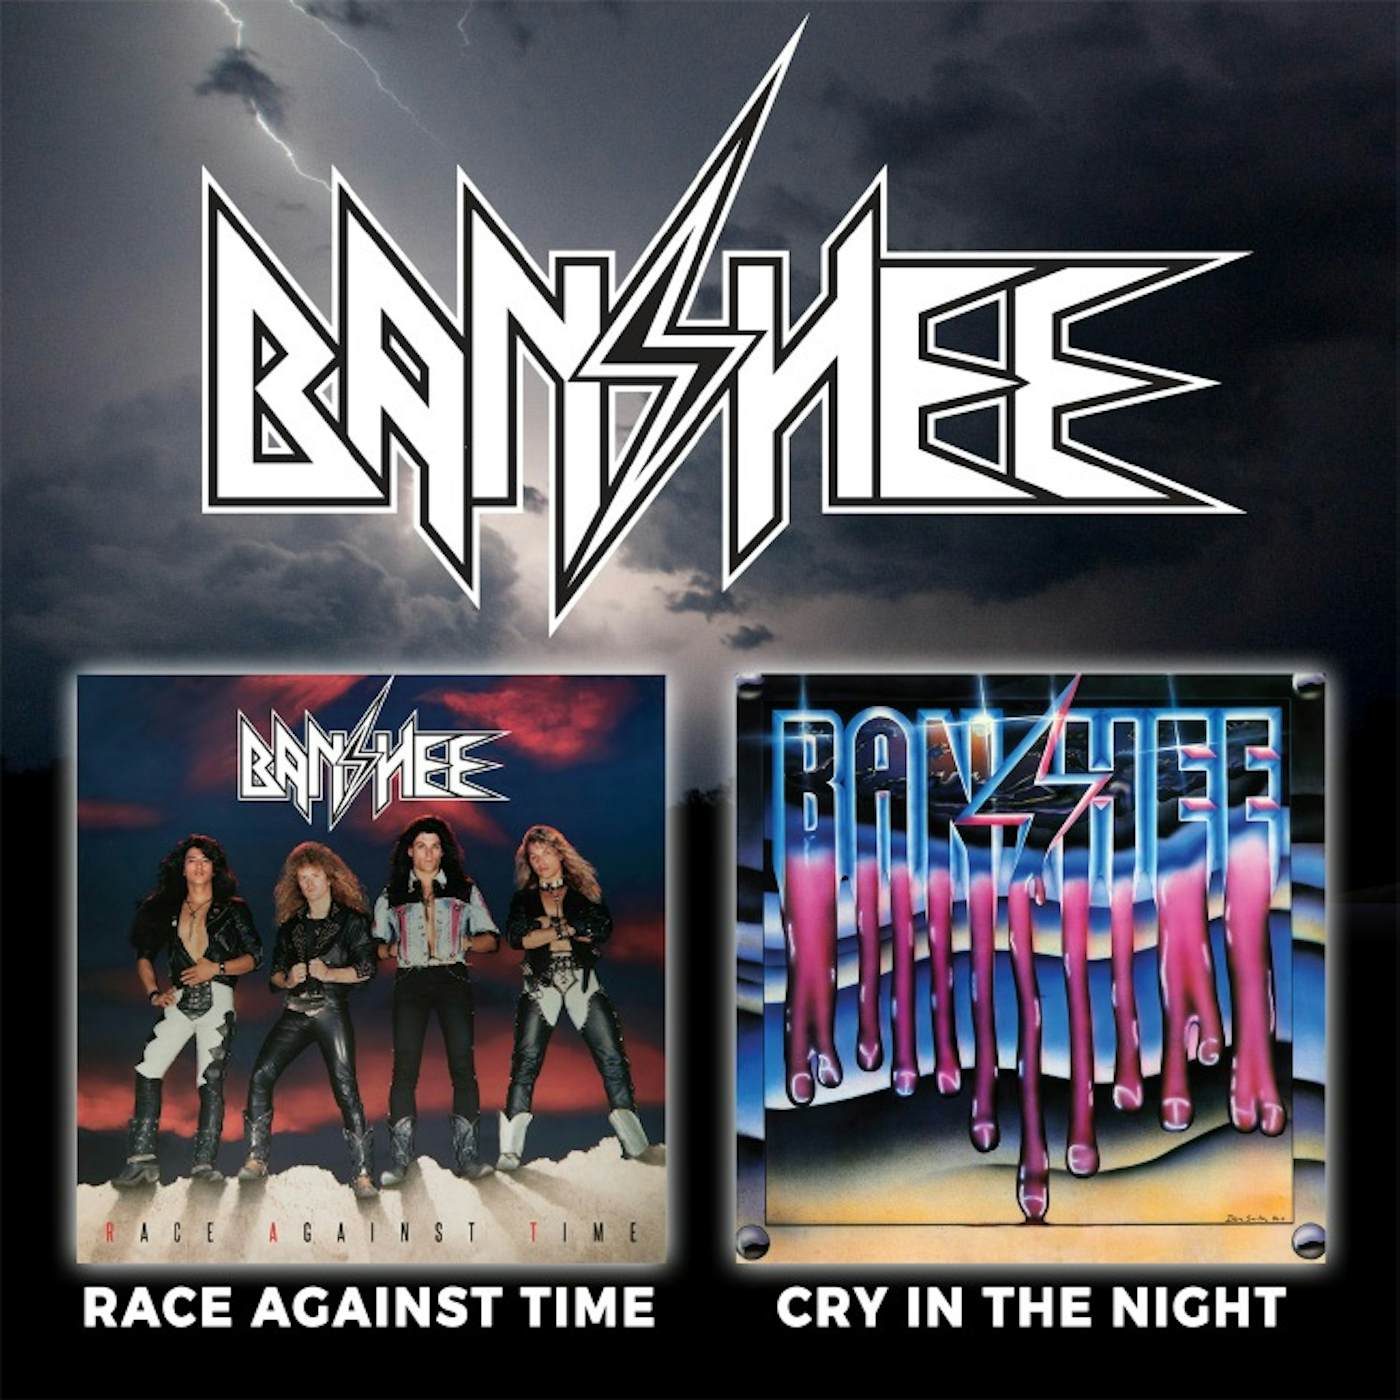 Banshee RACE AGAINST TIME / CRY IN THE NIGHT CD